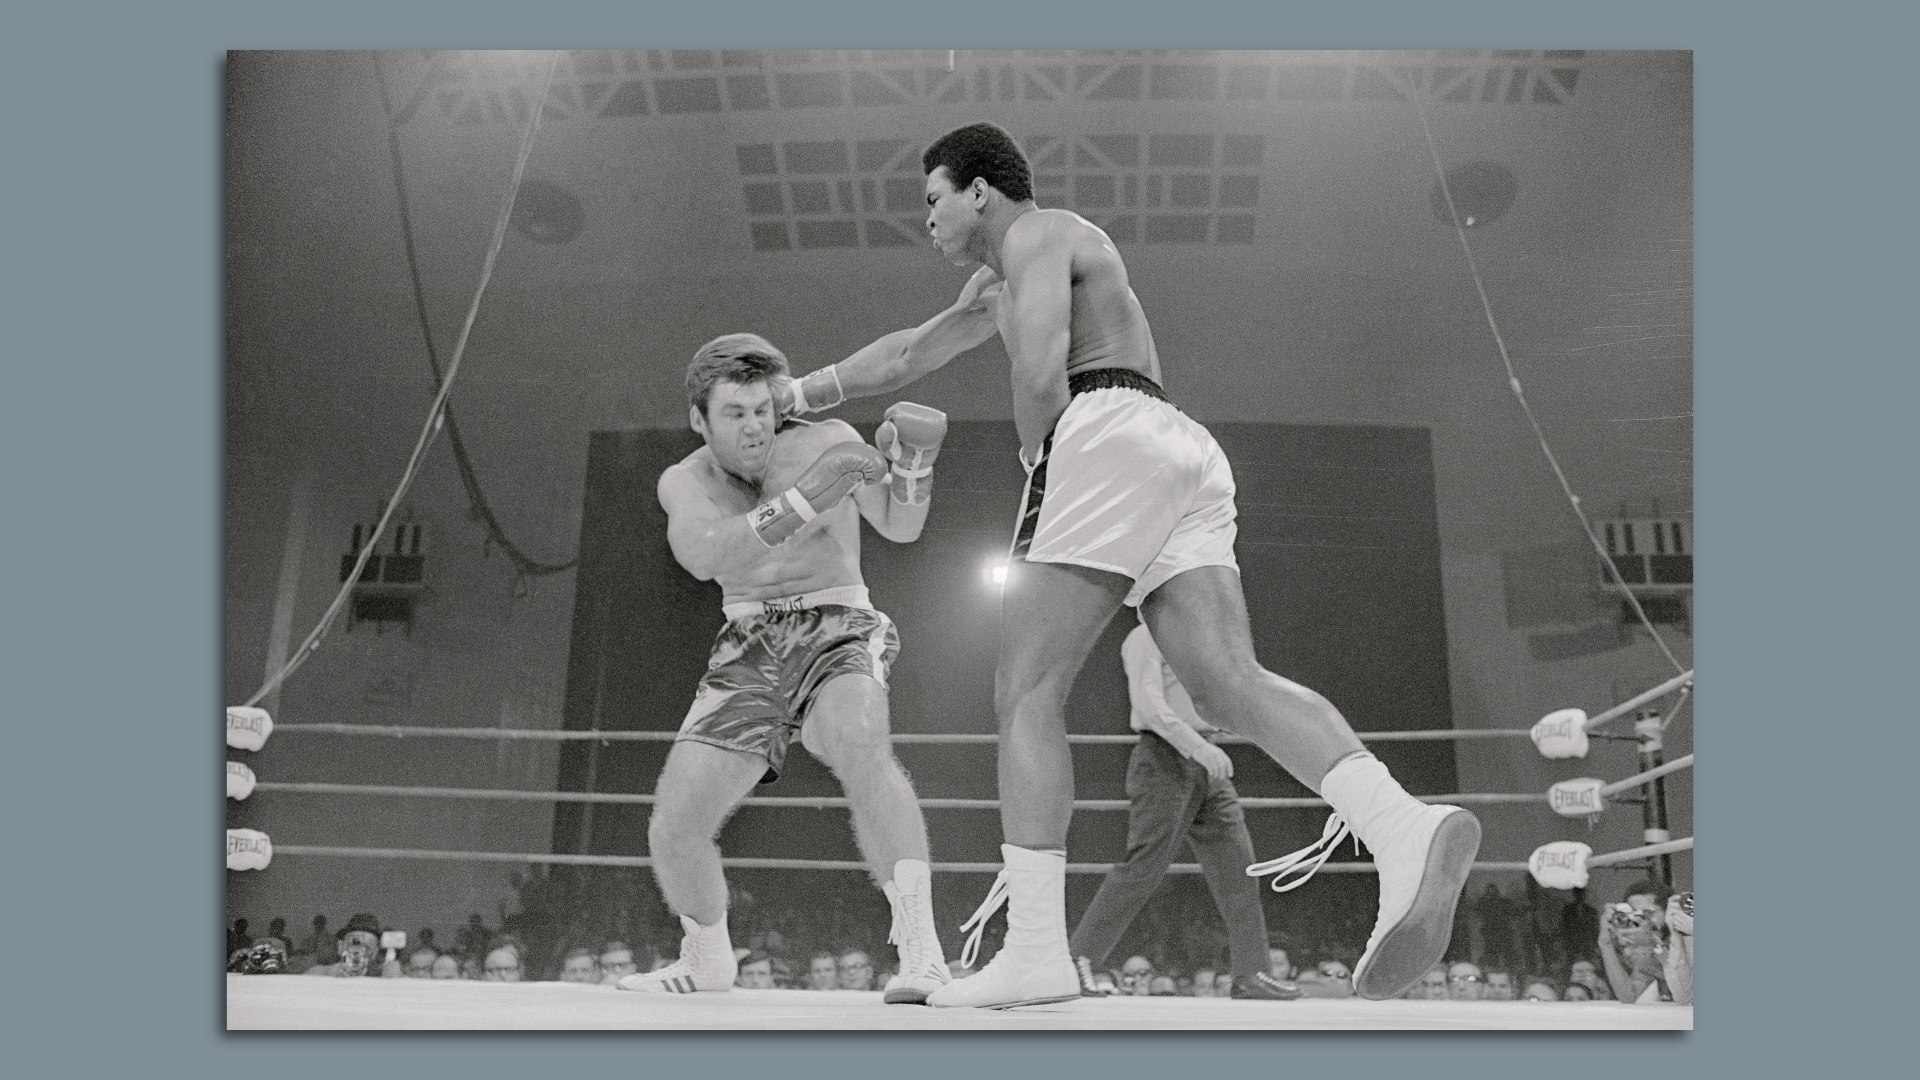 Muhammad Ali lands a punch on Jerry Quarry during their 1970 fight at the Atlanta Municipal Auditorium